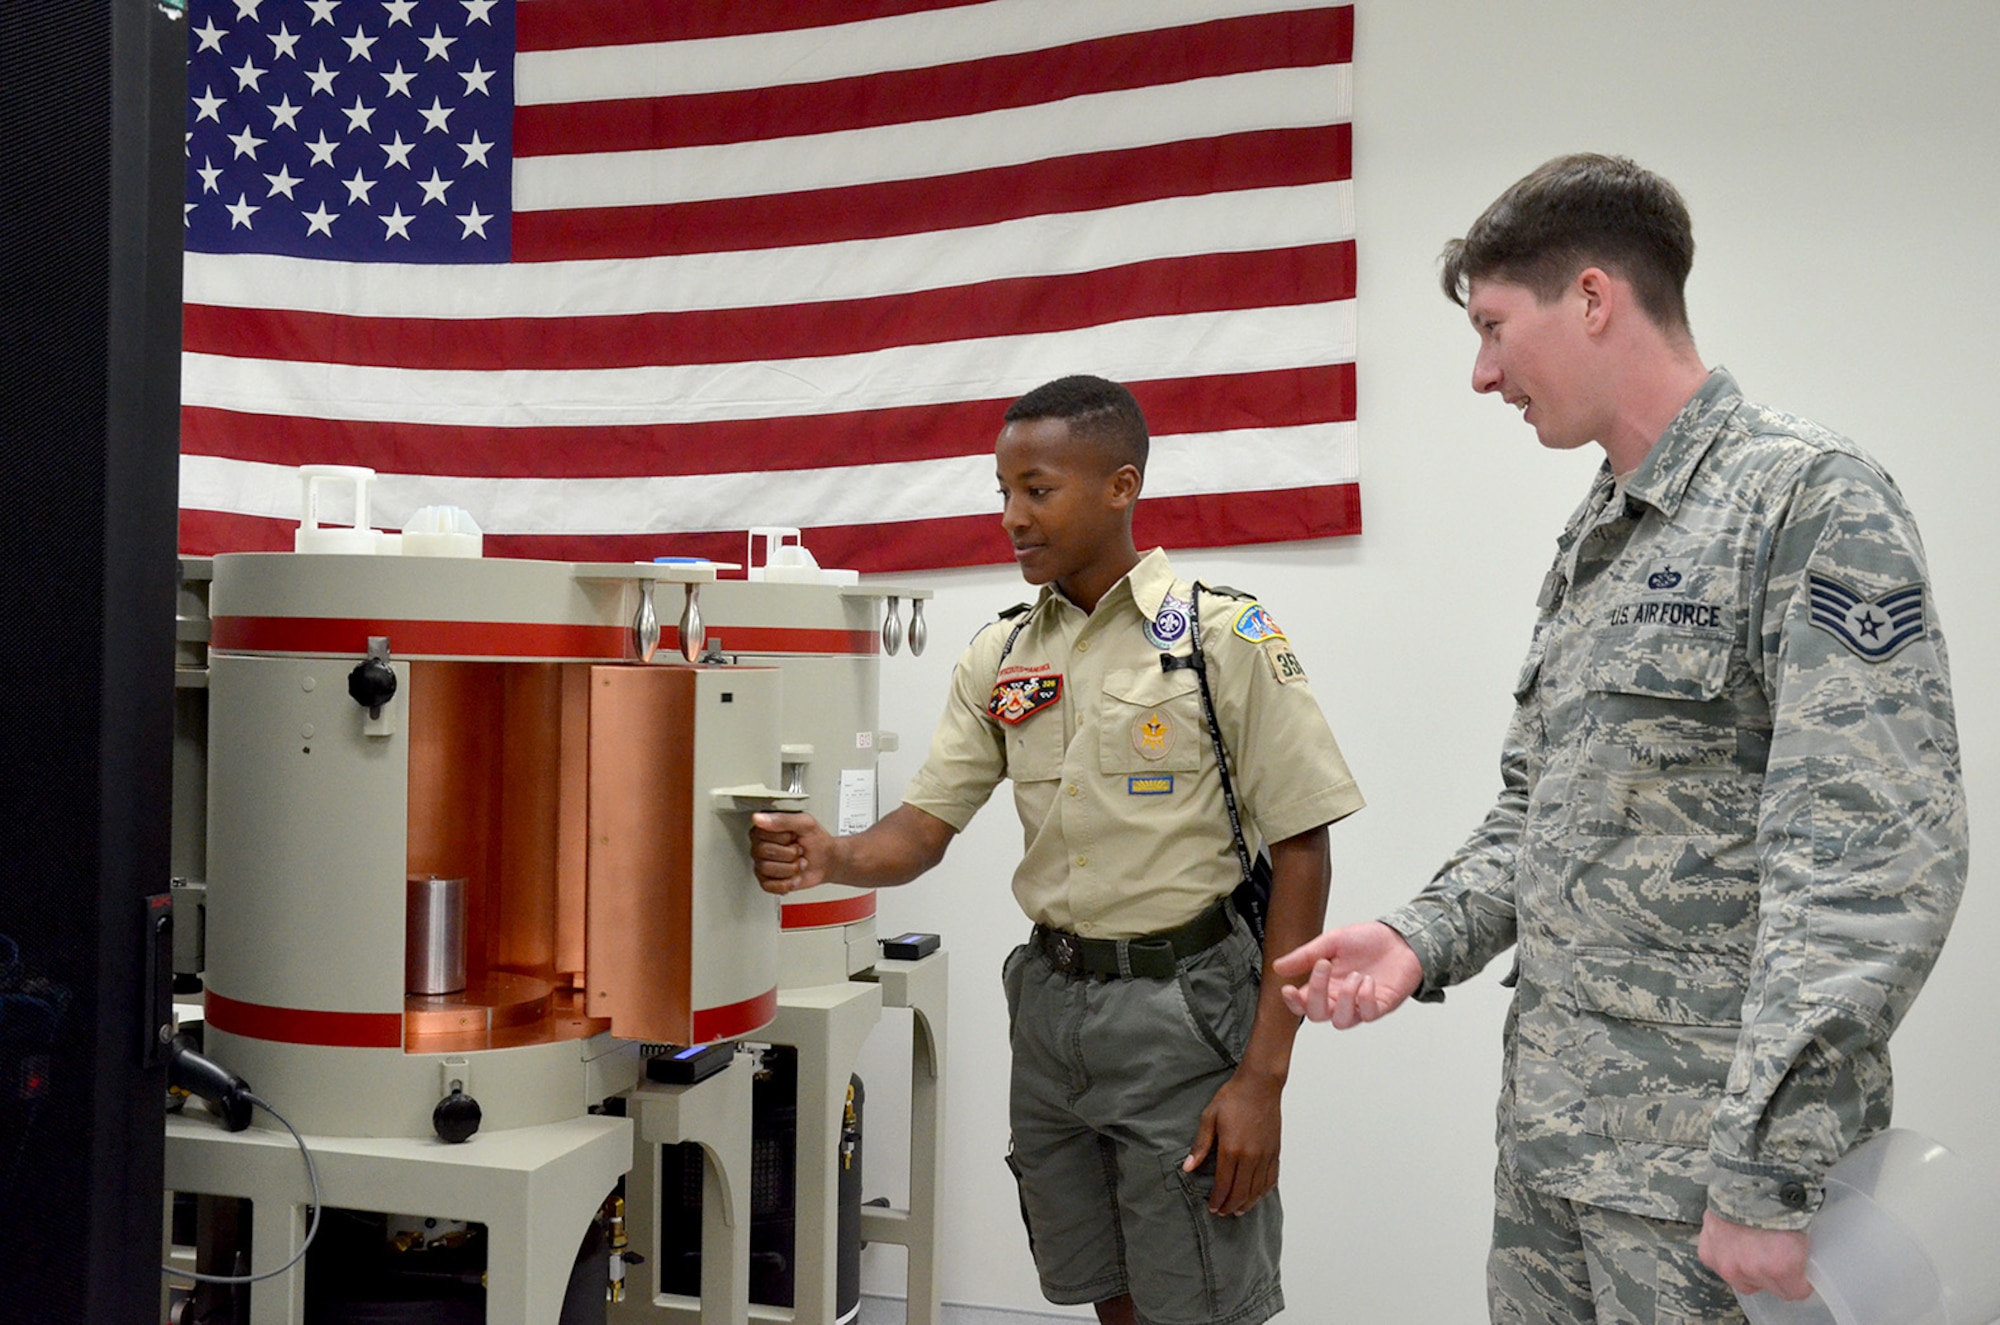 Larry Edgecombe, an 8th grader at Holy Trinity Episcopal Academy and member of Boy Scout Troop #355, opens the door of a gamma ray detector as Staff Sgt. Nicholas Jarvis, a radiochemistry lab technician, observes and explains how the detector works.  Edgecombe was one of 98 scouts who visited the Air Force Technical Applications Center March 31, 2018 to earn the Nuclear Science Merit Badge with the help of AFTAC Airmen.  (U.S. Air Force photo by Susan A. Romano)